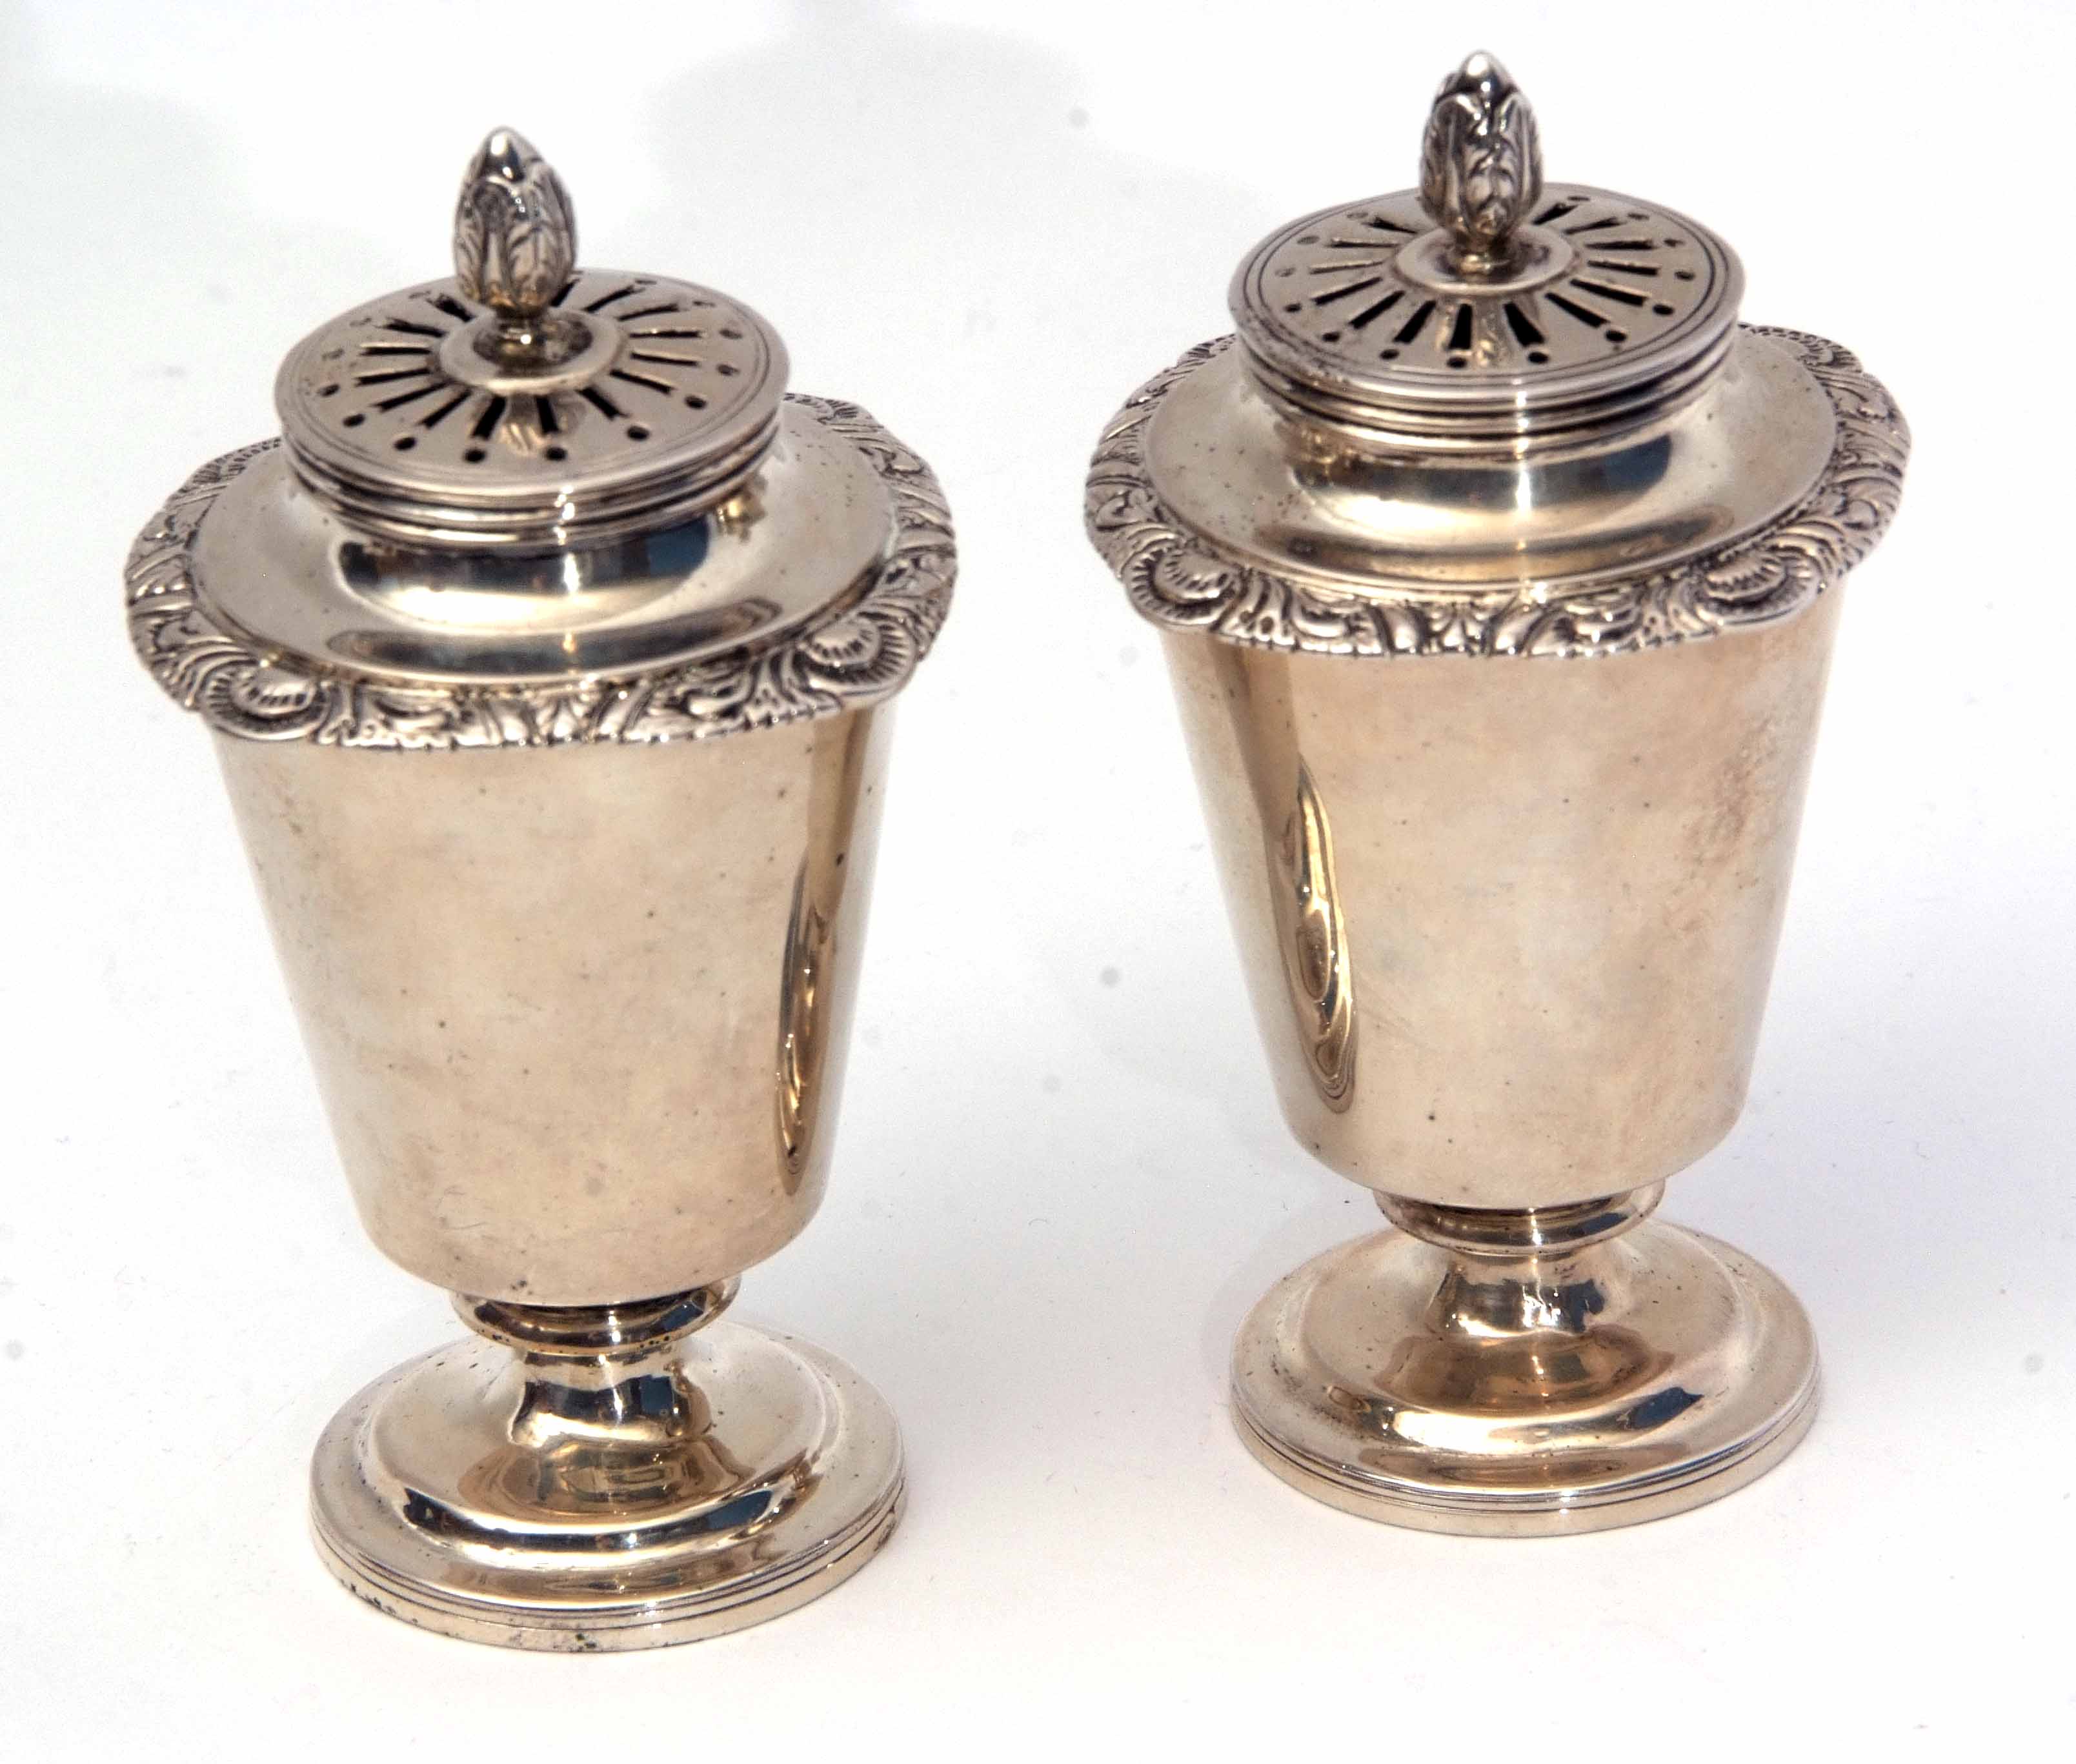 Two Indian colonial silver casters, each with pierced pull off covers and cast and applied finials - Image 2 of 4